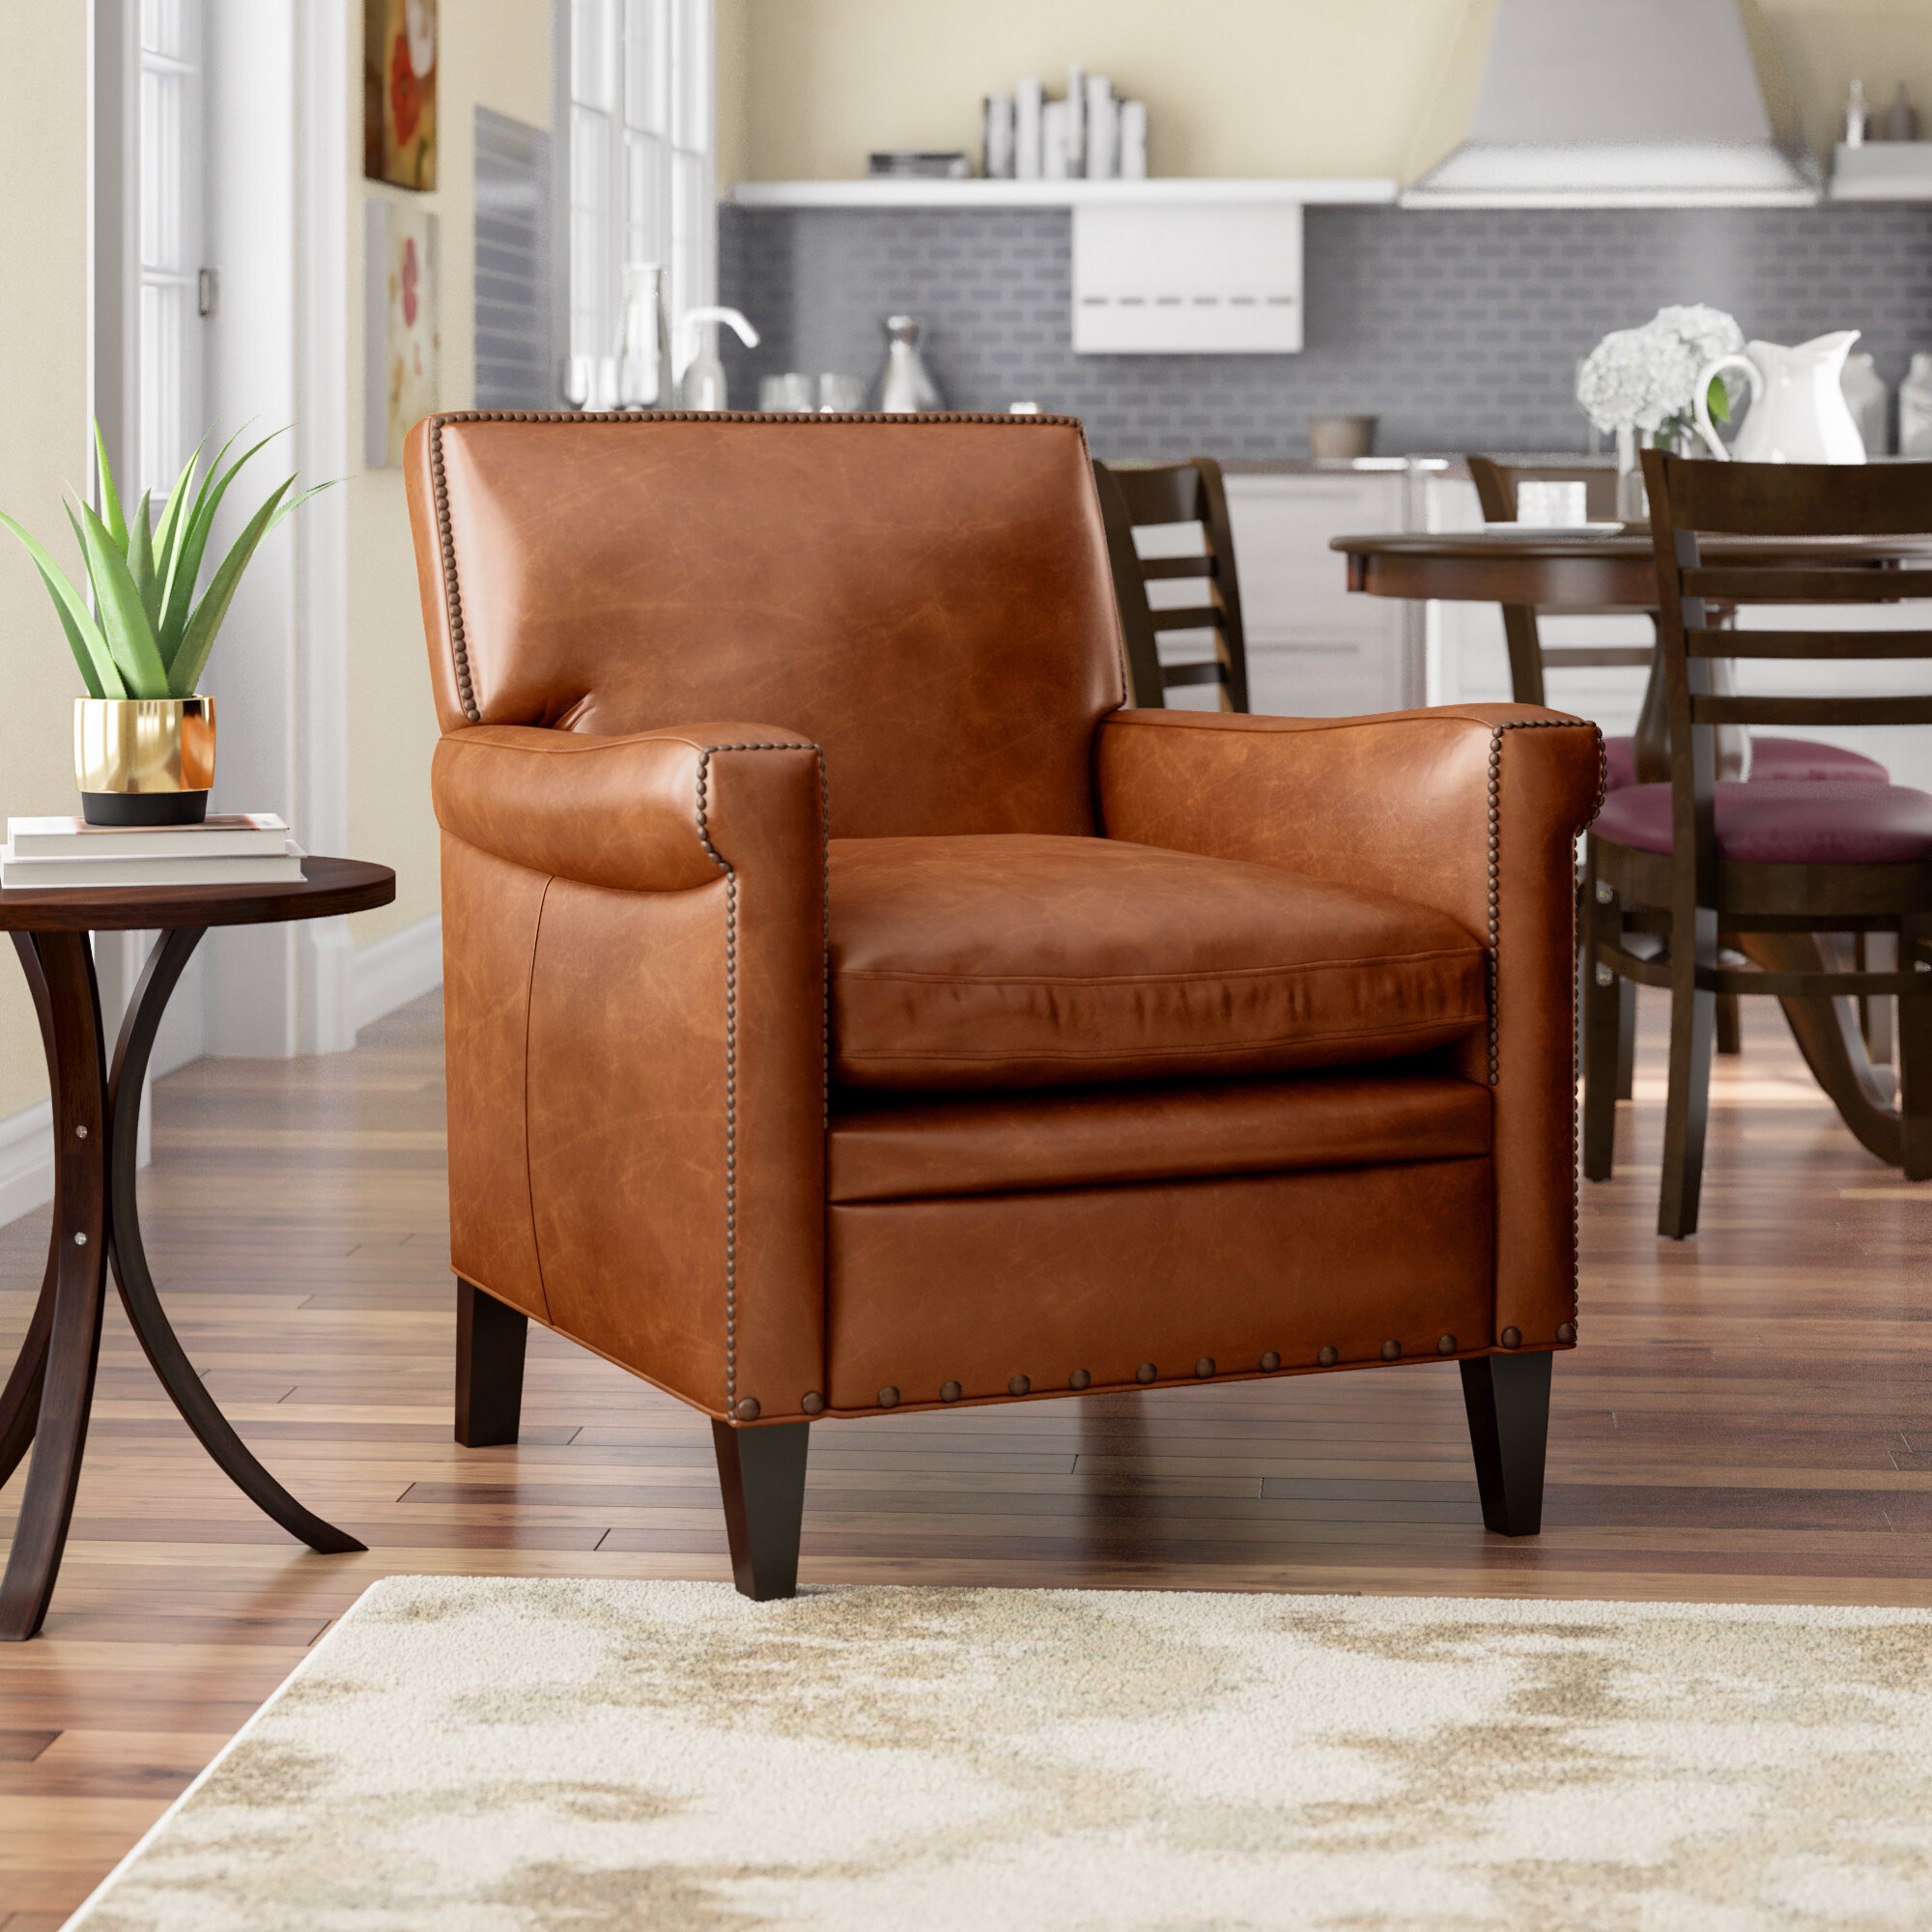 Wayfair Leather Chair And Ottoman : Brown Leather Chair With Ottoman